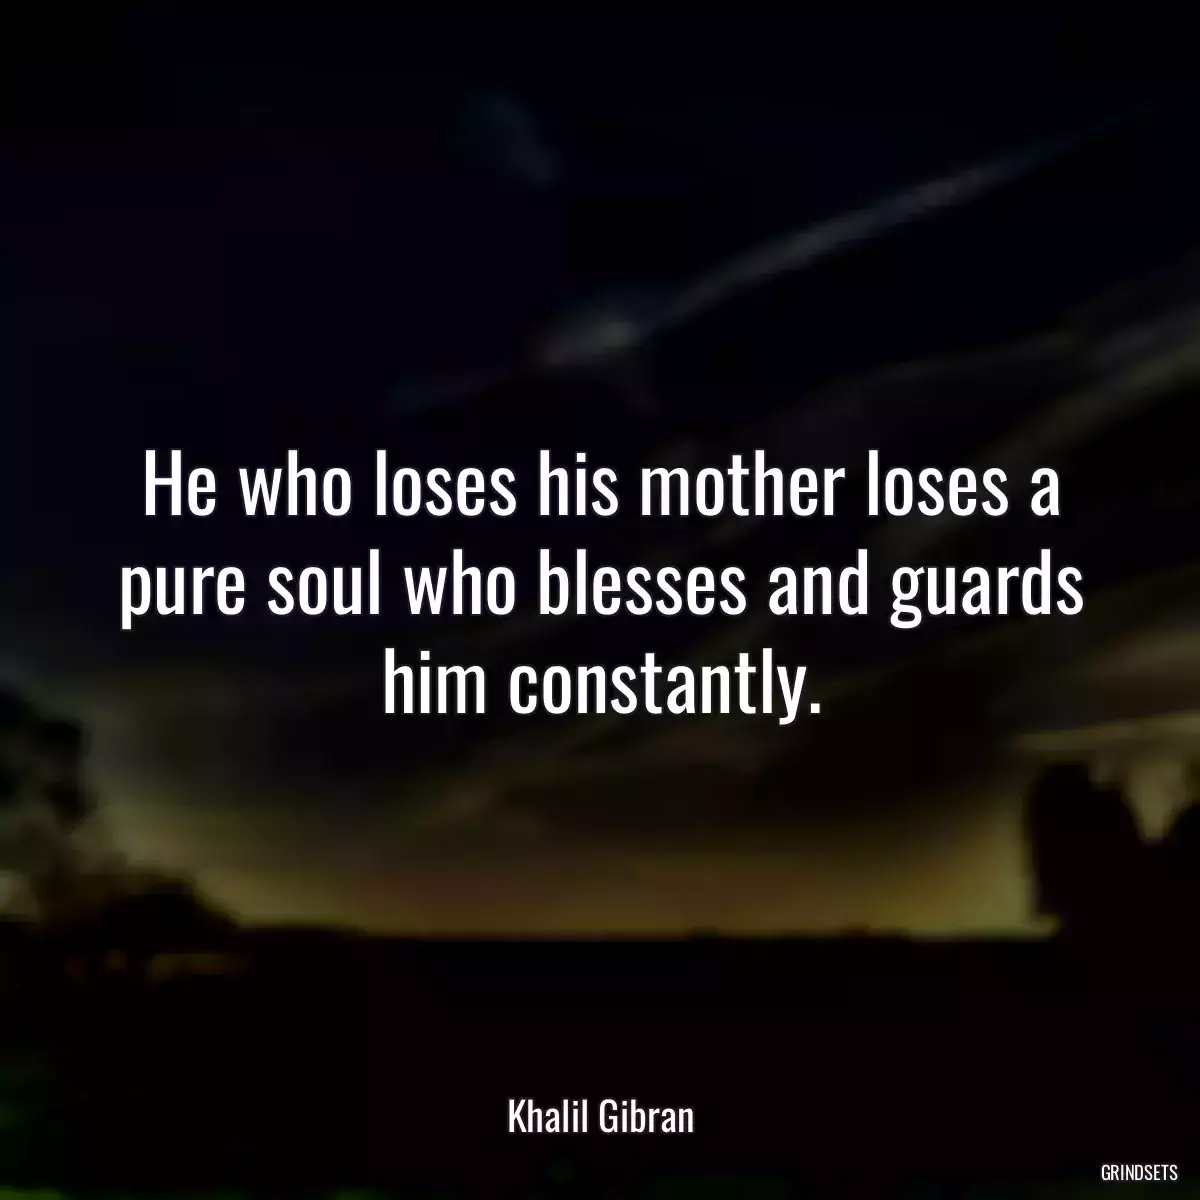 He who loses his mother loses a pure soul who blesses and guards him constantly.